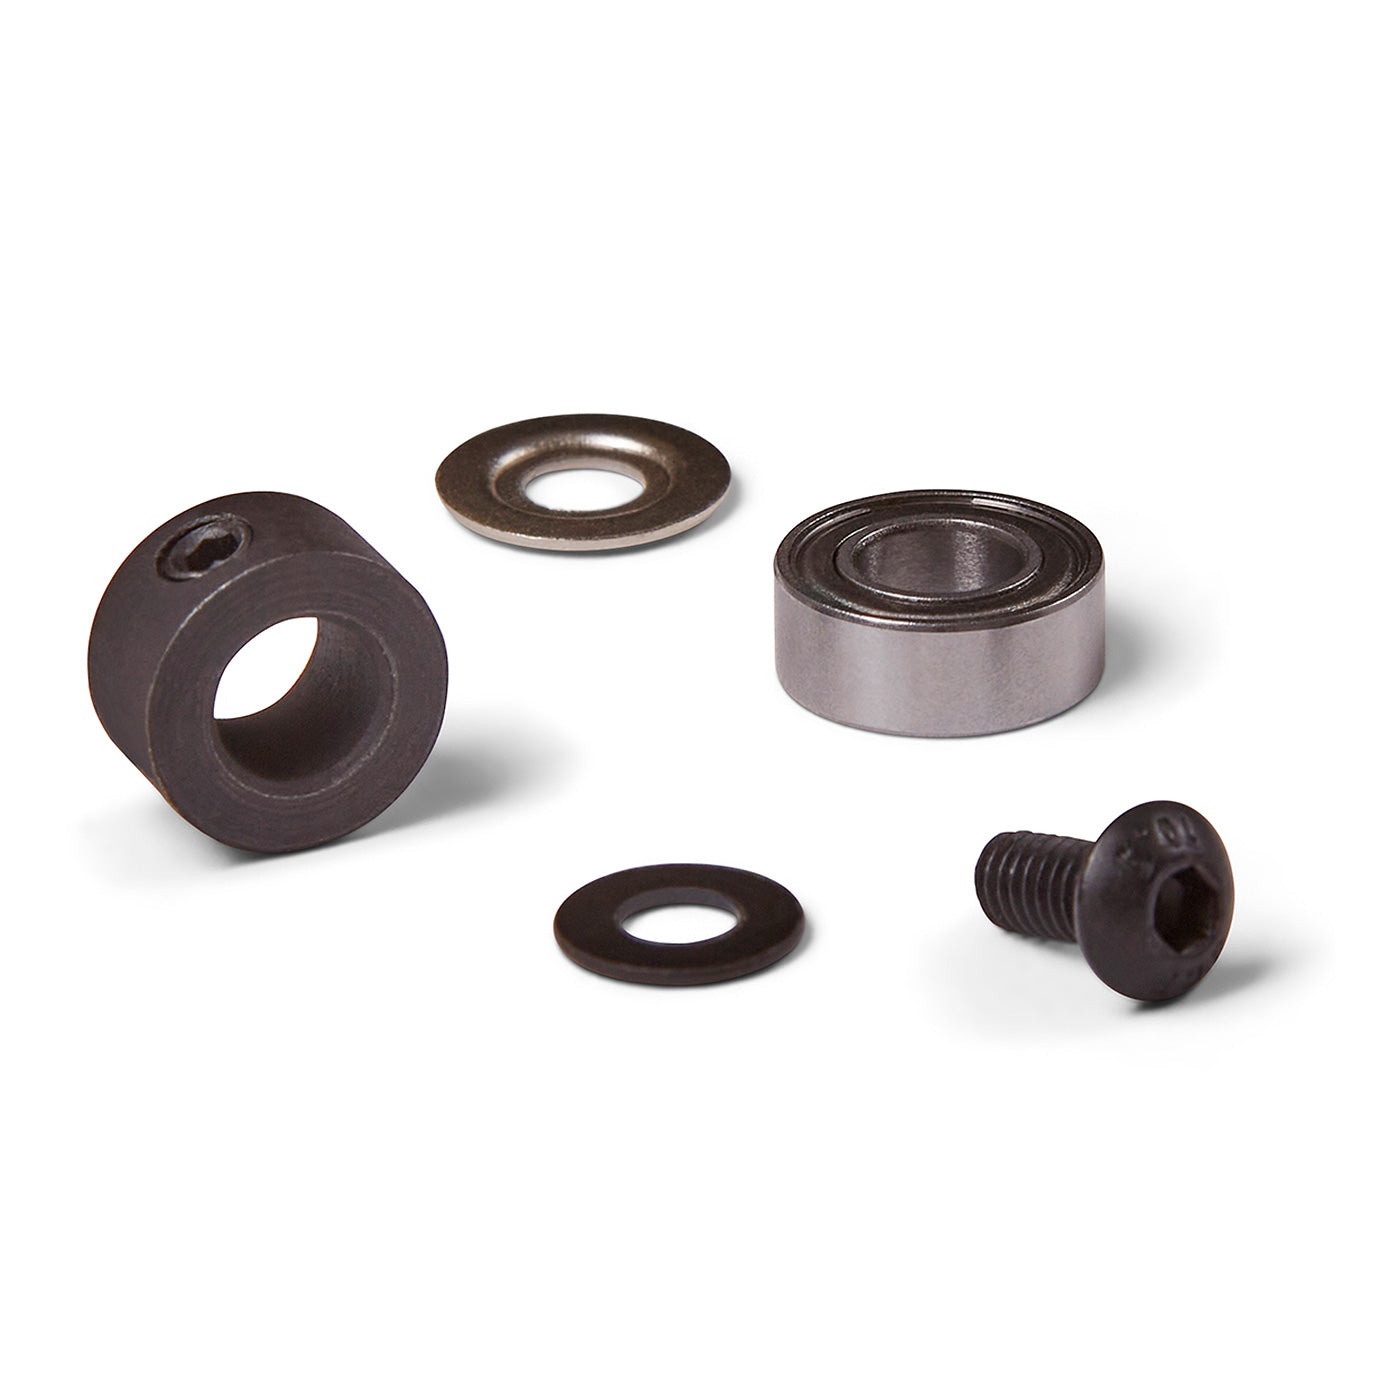 Bearing Kit for R5648, R5649, R5651, R5652, R5657 and R5658  